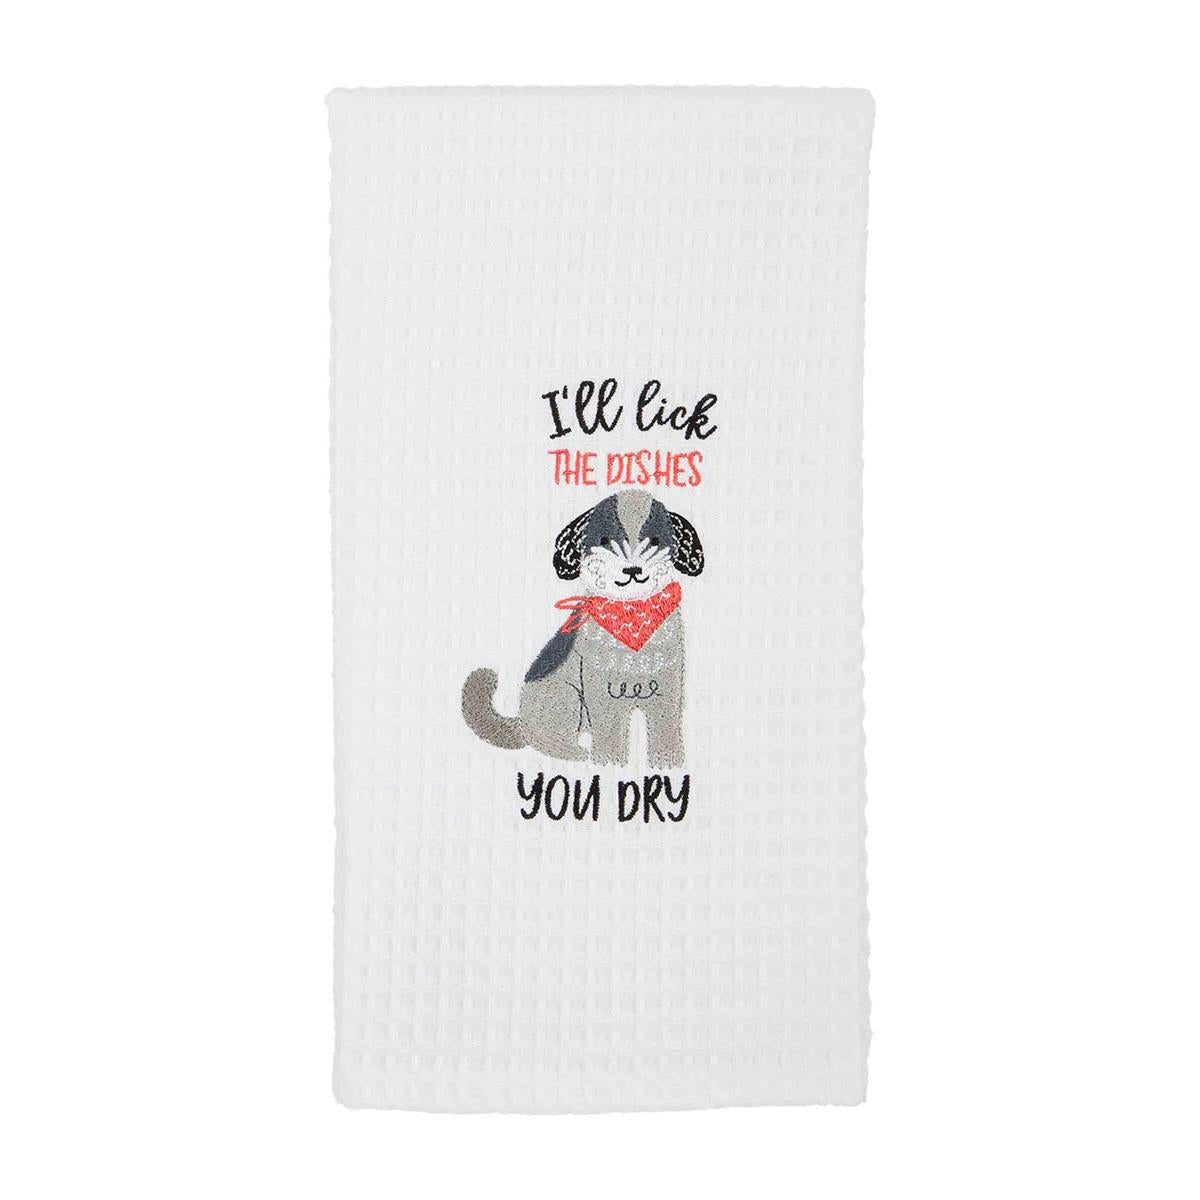 white dish towel with embroidered dog and "i'll lich the dishes you dry" embroidered on it.